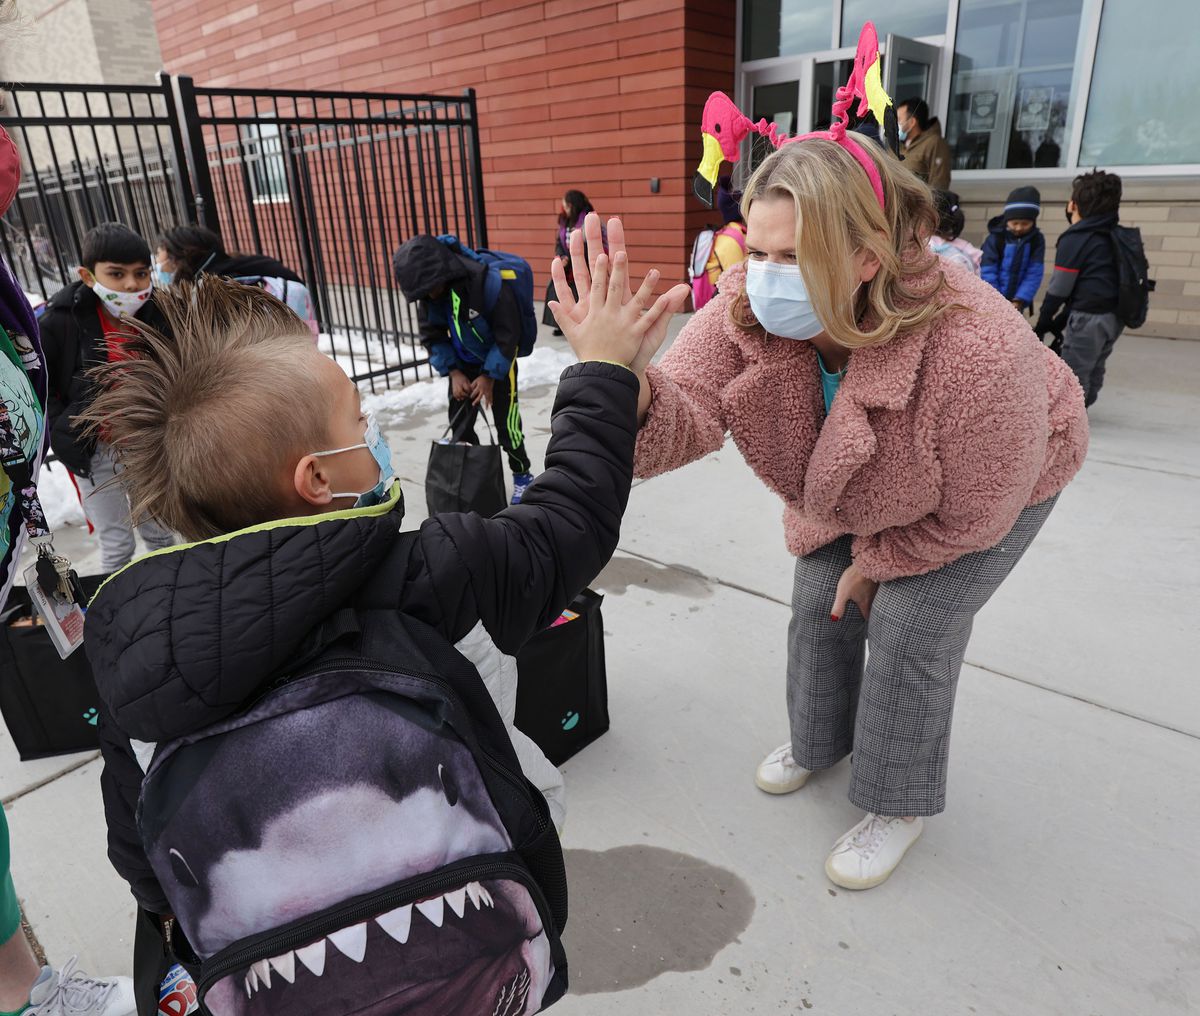 Meadowlark Elementary student Owen Currier, left, high-fives Amy Haran after she gave him a food bag at the school in Salt Lake City on Thursday, Dec. 16, 2021. USANA’s management team delivered 385 two-week food bags for elementary students who will be out of school for the holiday break.